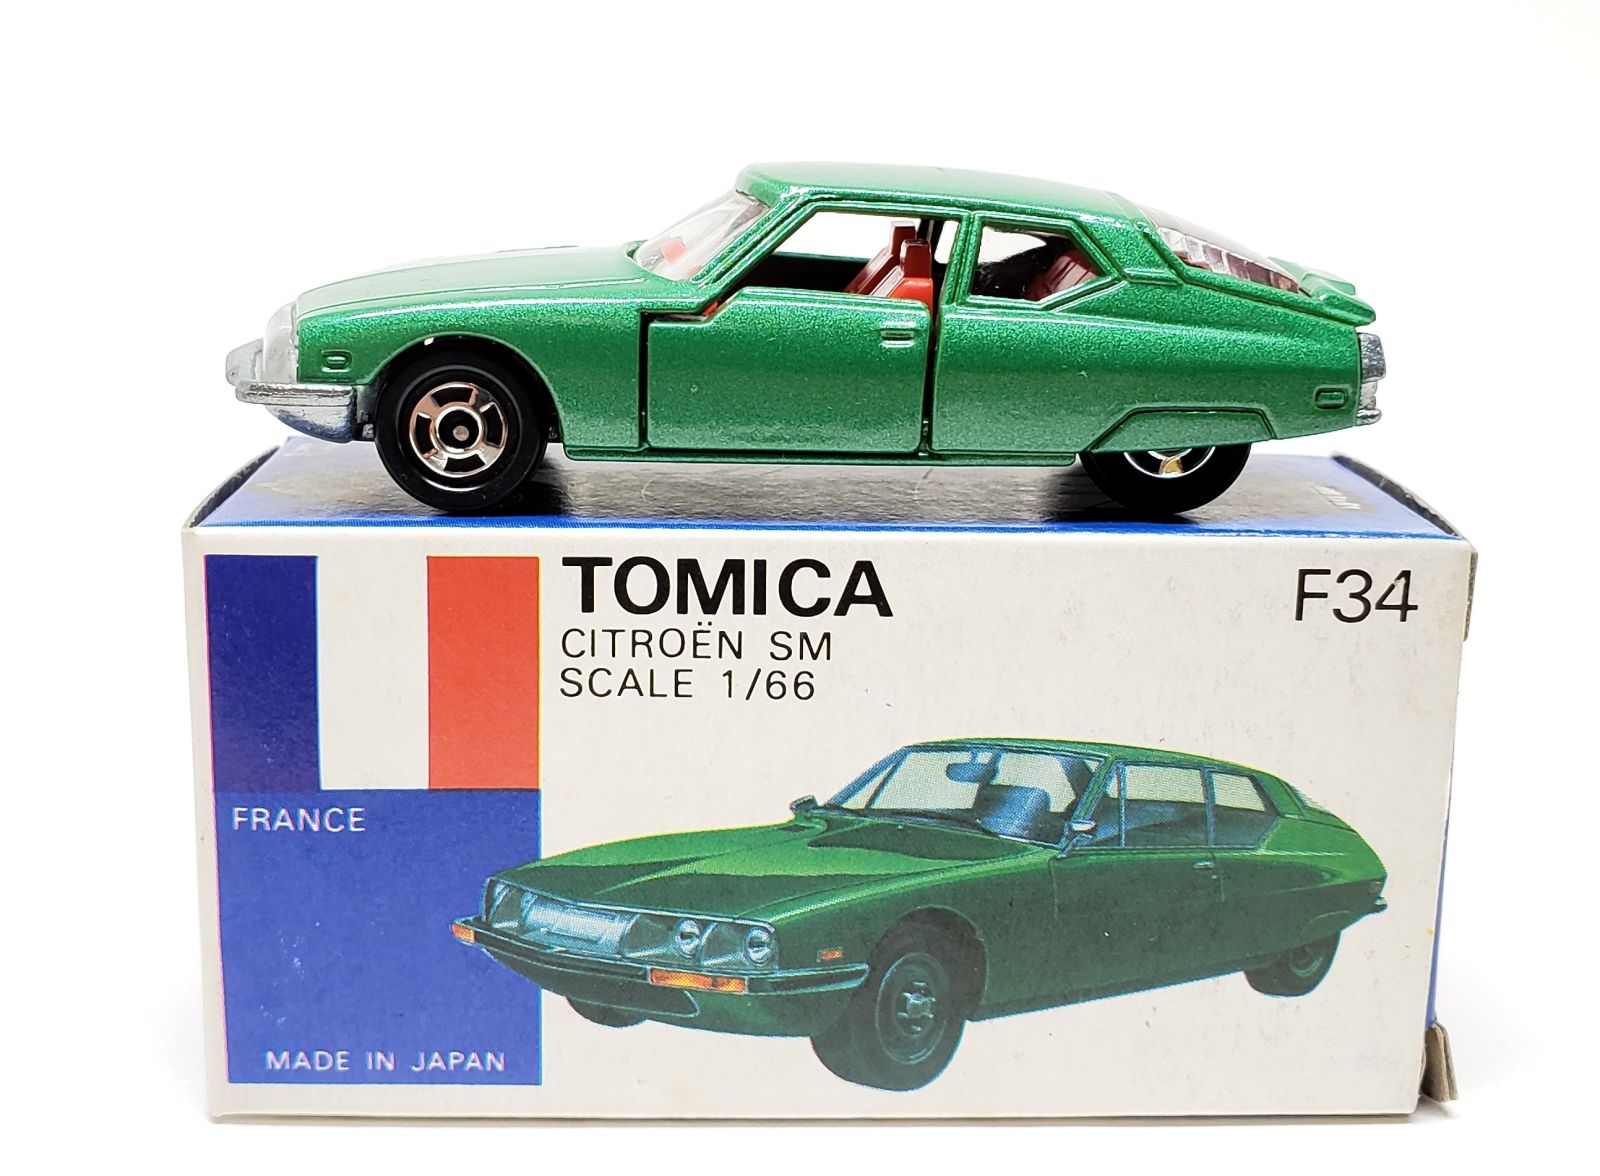 Illustration for article titled [REVIEW] Tomica Citroen SM